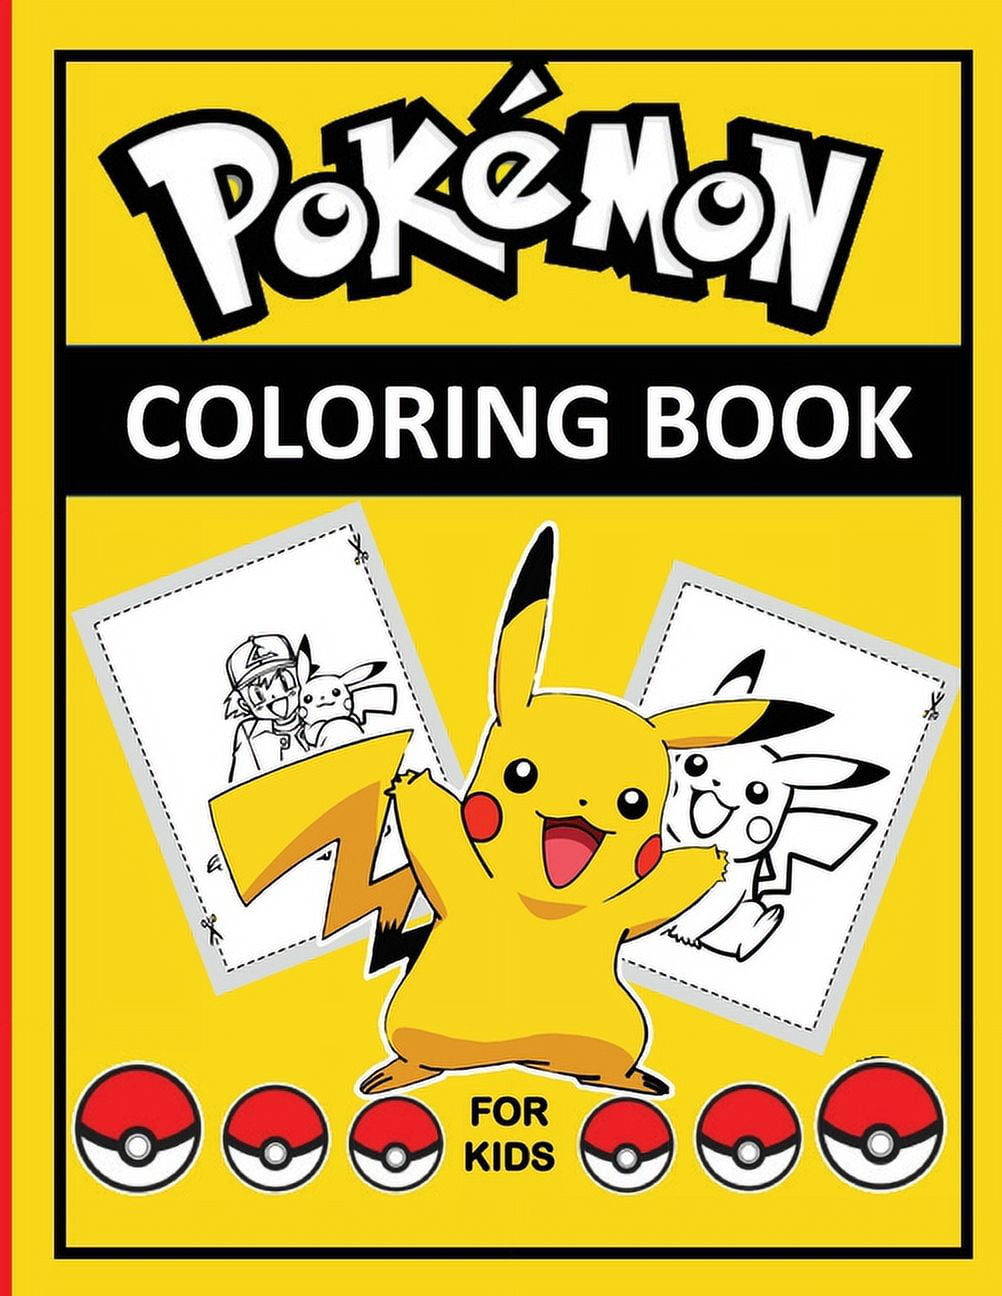 Pokemon Coloring Book Vol 2: pokemon coloring books for kids. 25 Pages,  Size - 8.5 x 11. (Paperback)